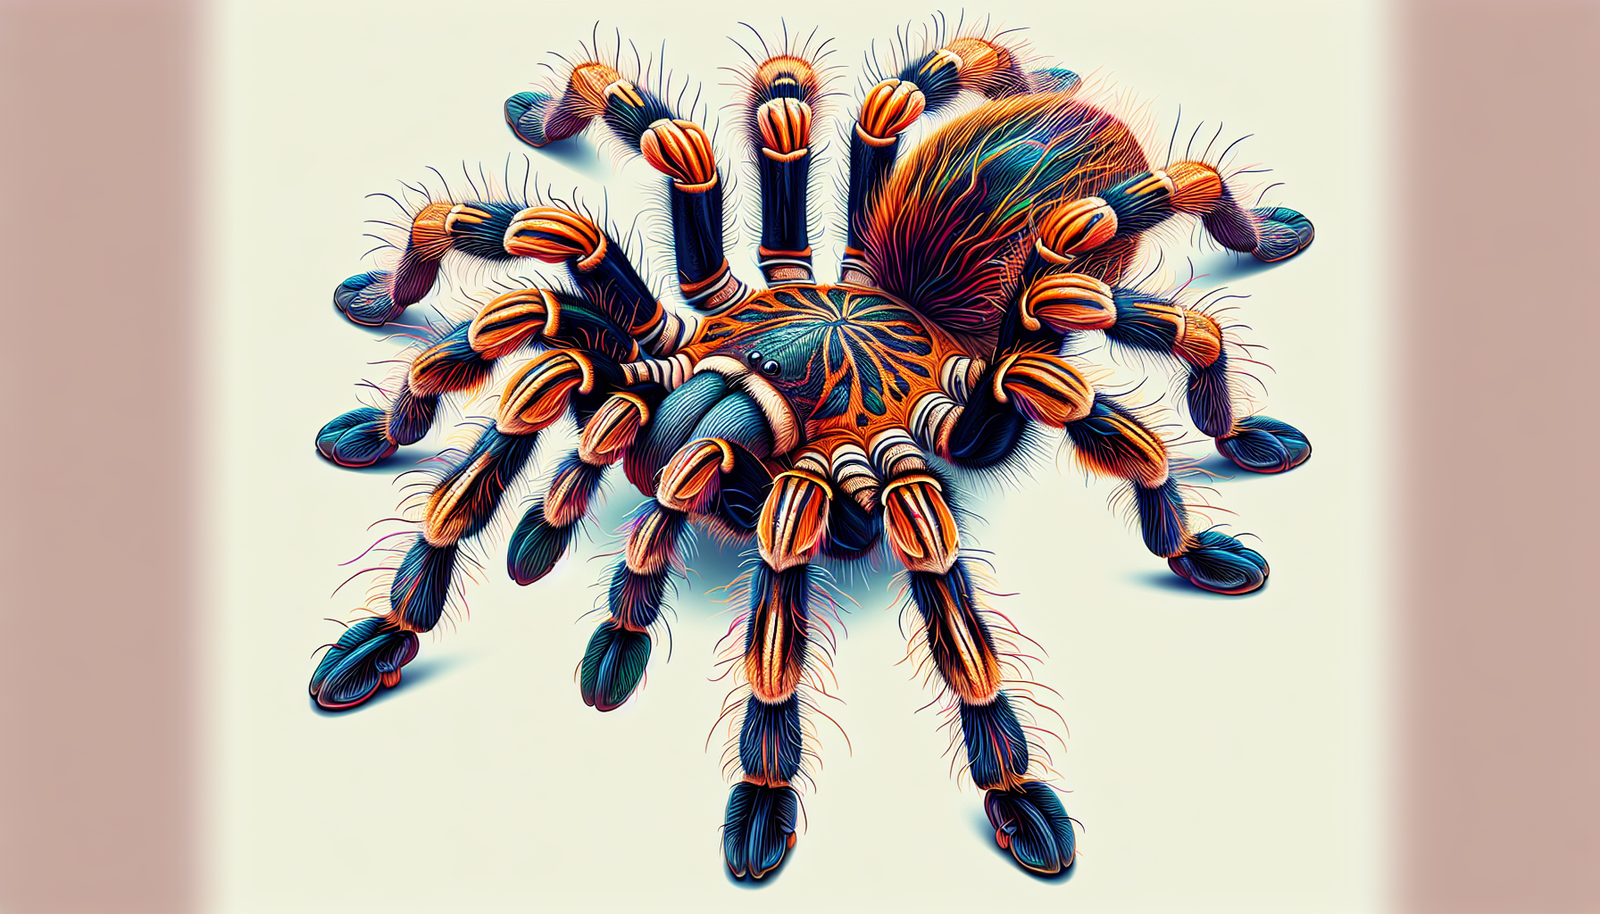 What Are The Characteristics Of The Vibrant And Fast-moving Malaysian Tiger Tarantula?